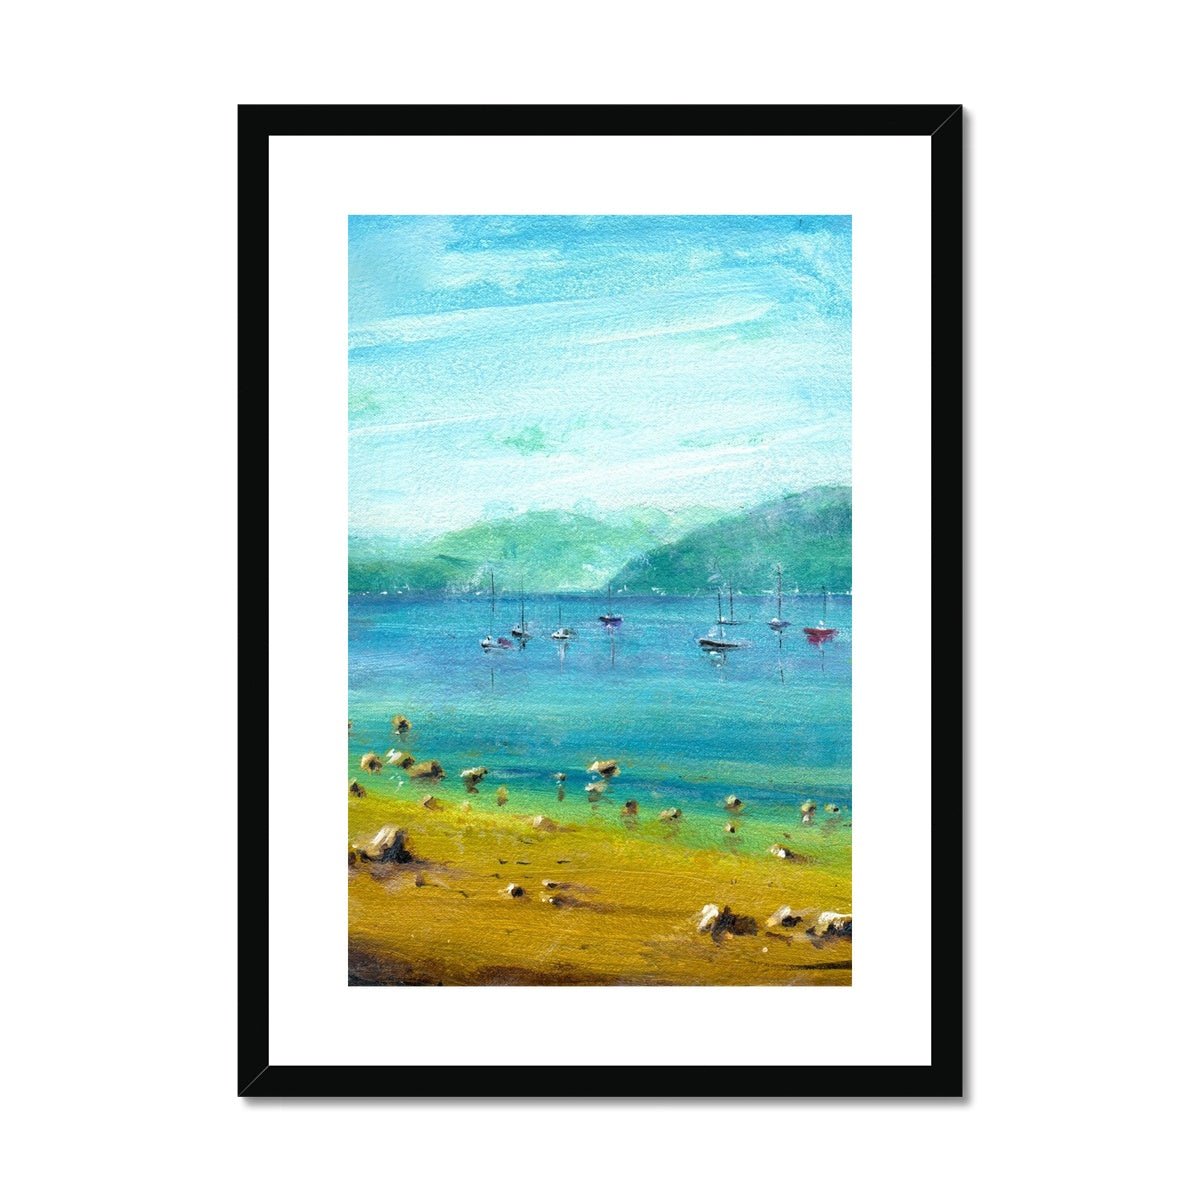 A Summer Day On The Clyde Painting | Framed & Mounted Prints From Scotland-Framed & Mounted Prints-River Clyde Art Gallery-A2 Portrait-Black Frame-Paintings, Prints, Homeware, Art Gifts From Scotland By Scottish Artist Kevin Hunter